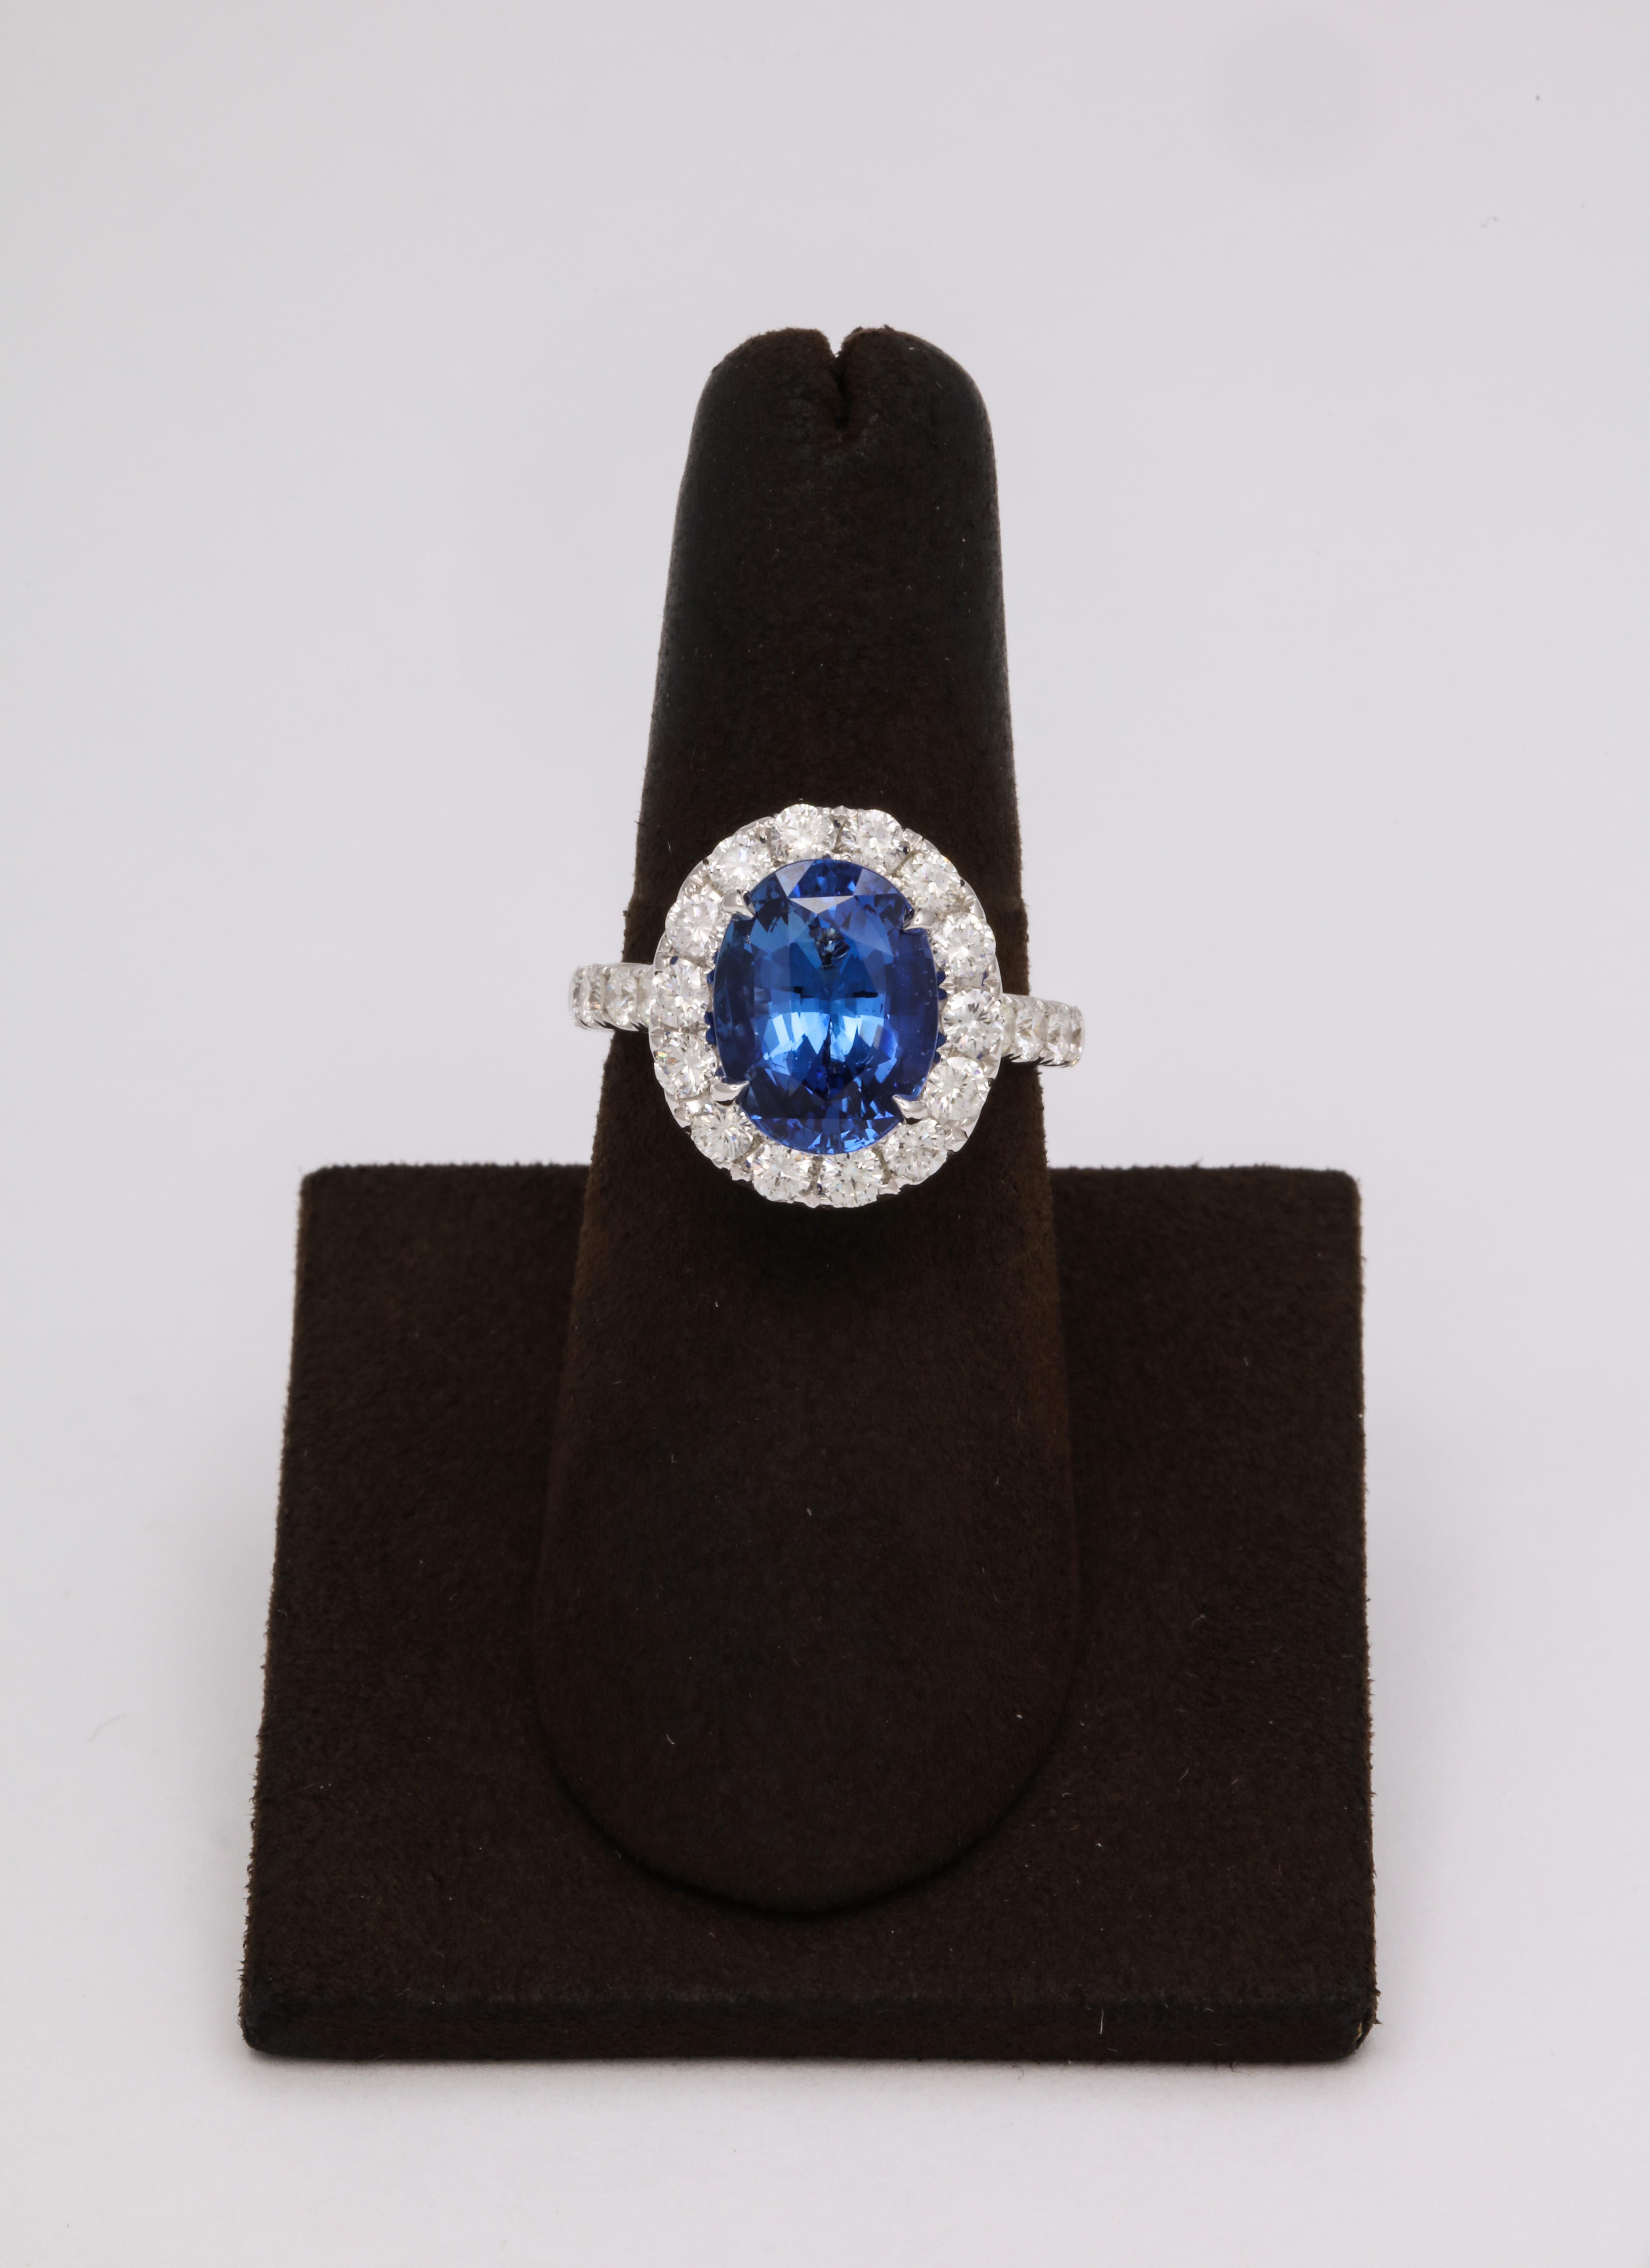 
Beautiful Ceylon Sapphire!!

5.20 carat vibrant blue sapphire -- full of life! 

Set in a wearable diamond mounting. 

1.64 carats of white round brilliant cut diamonds.

The mounting features unique diamond detail and engraving.

Currently a size